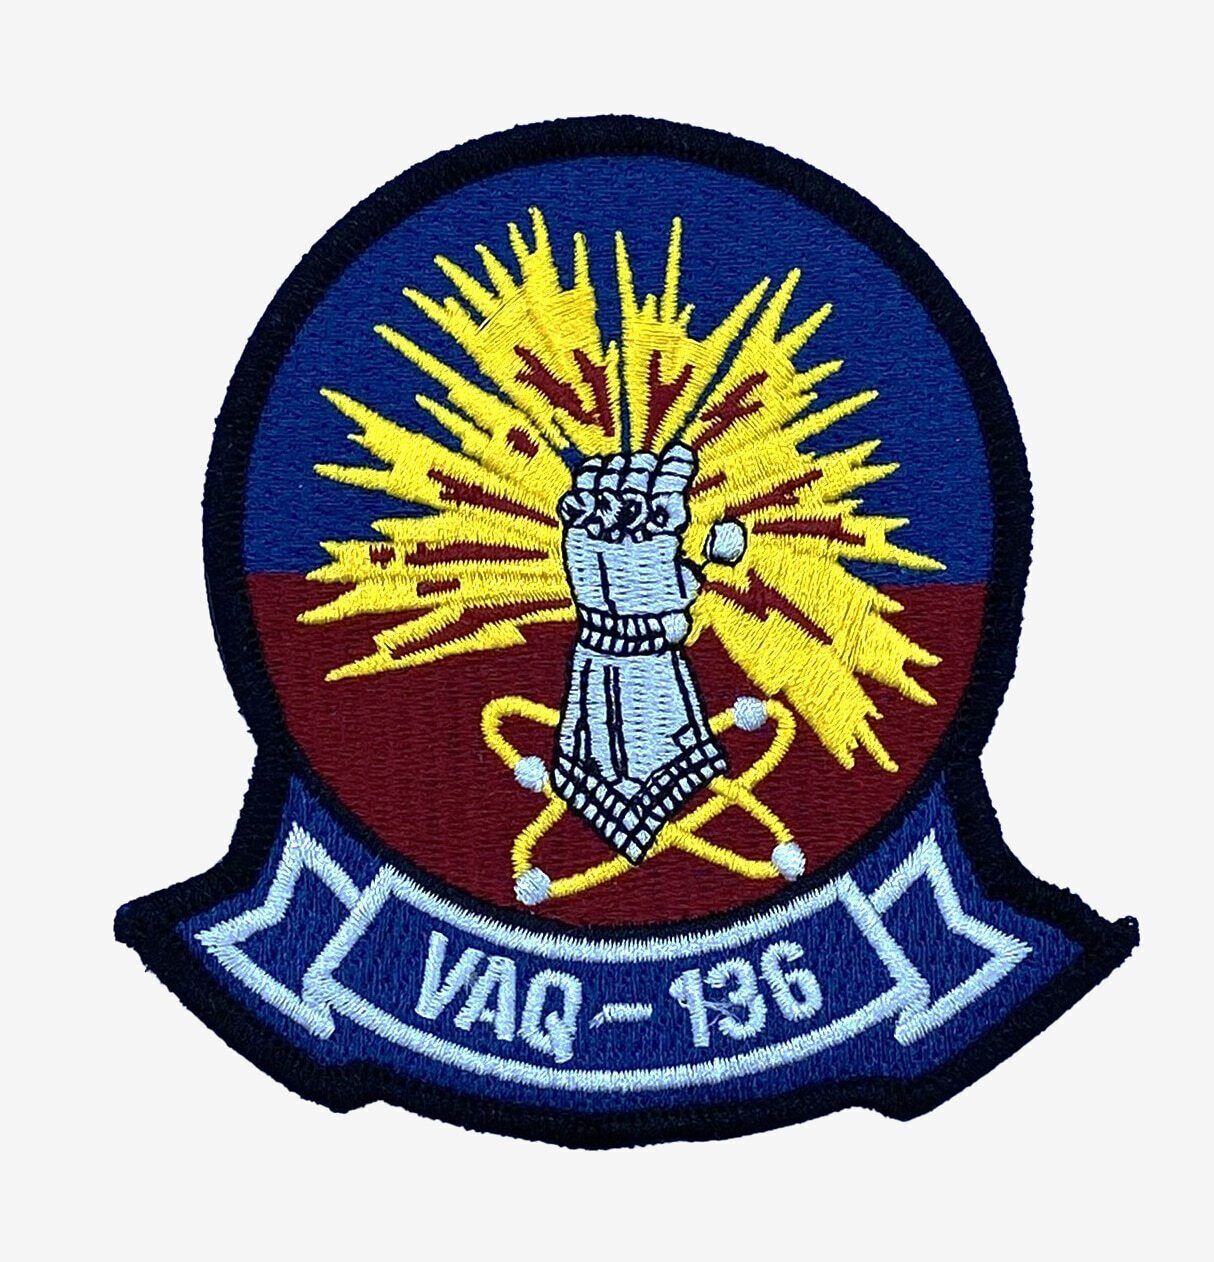 VAQ-136 Gauntlets Squadron Patch –With Hook and Loop, 4